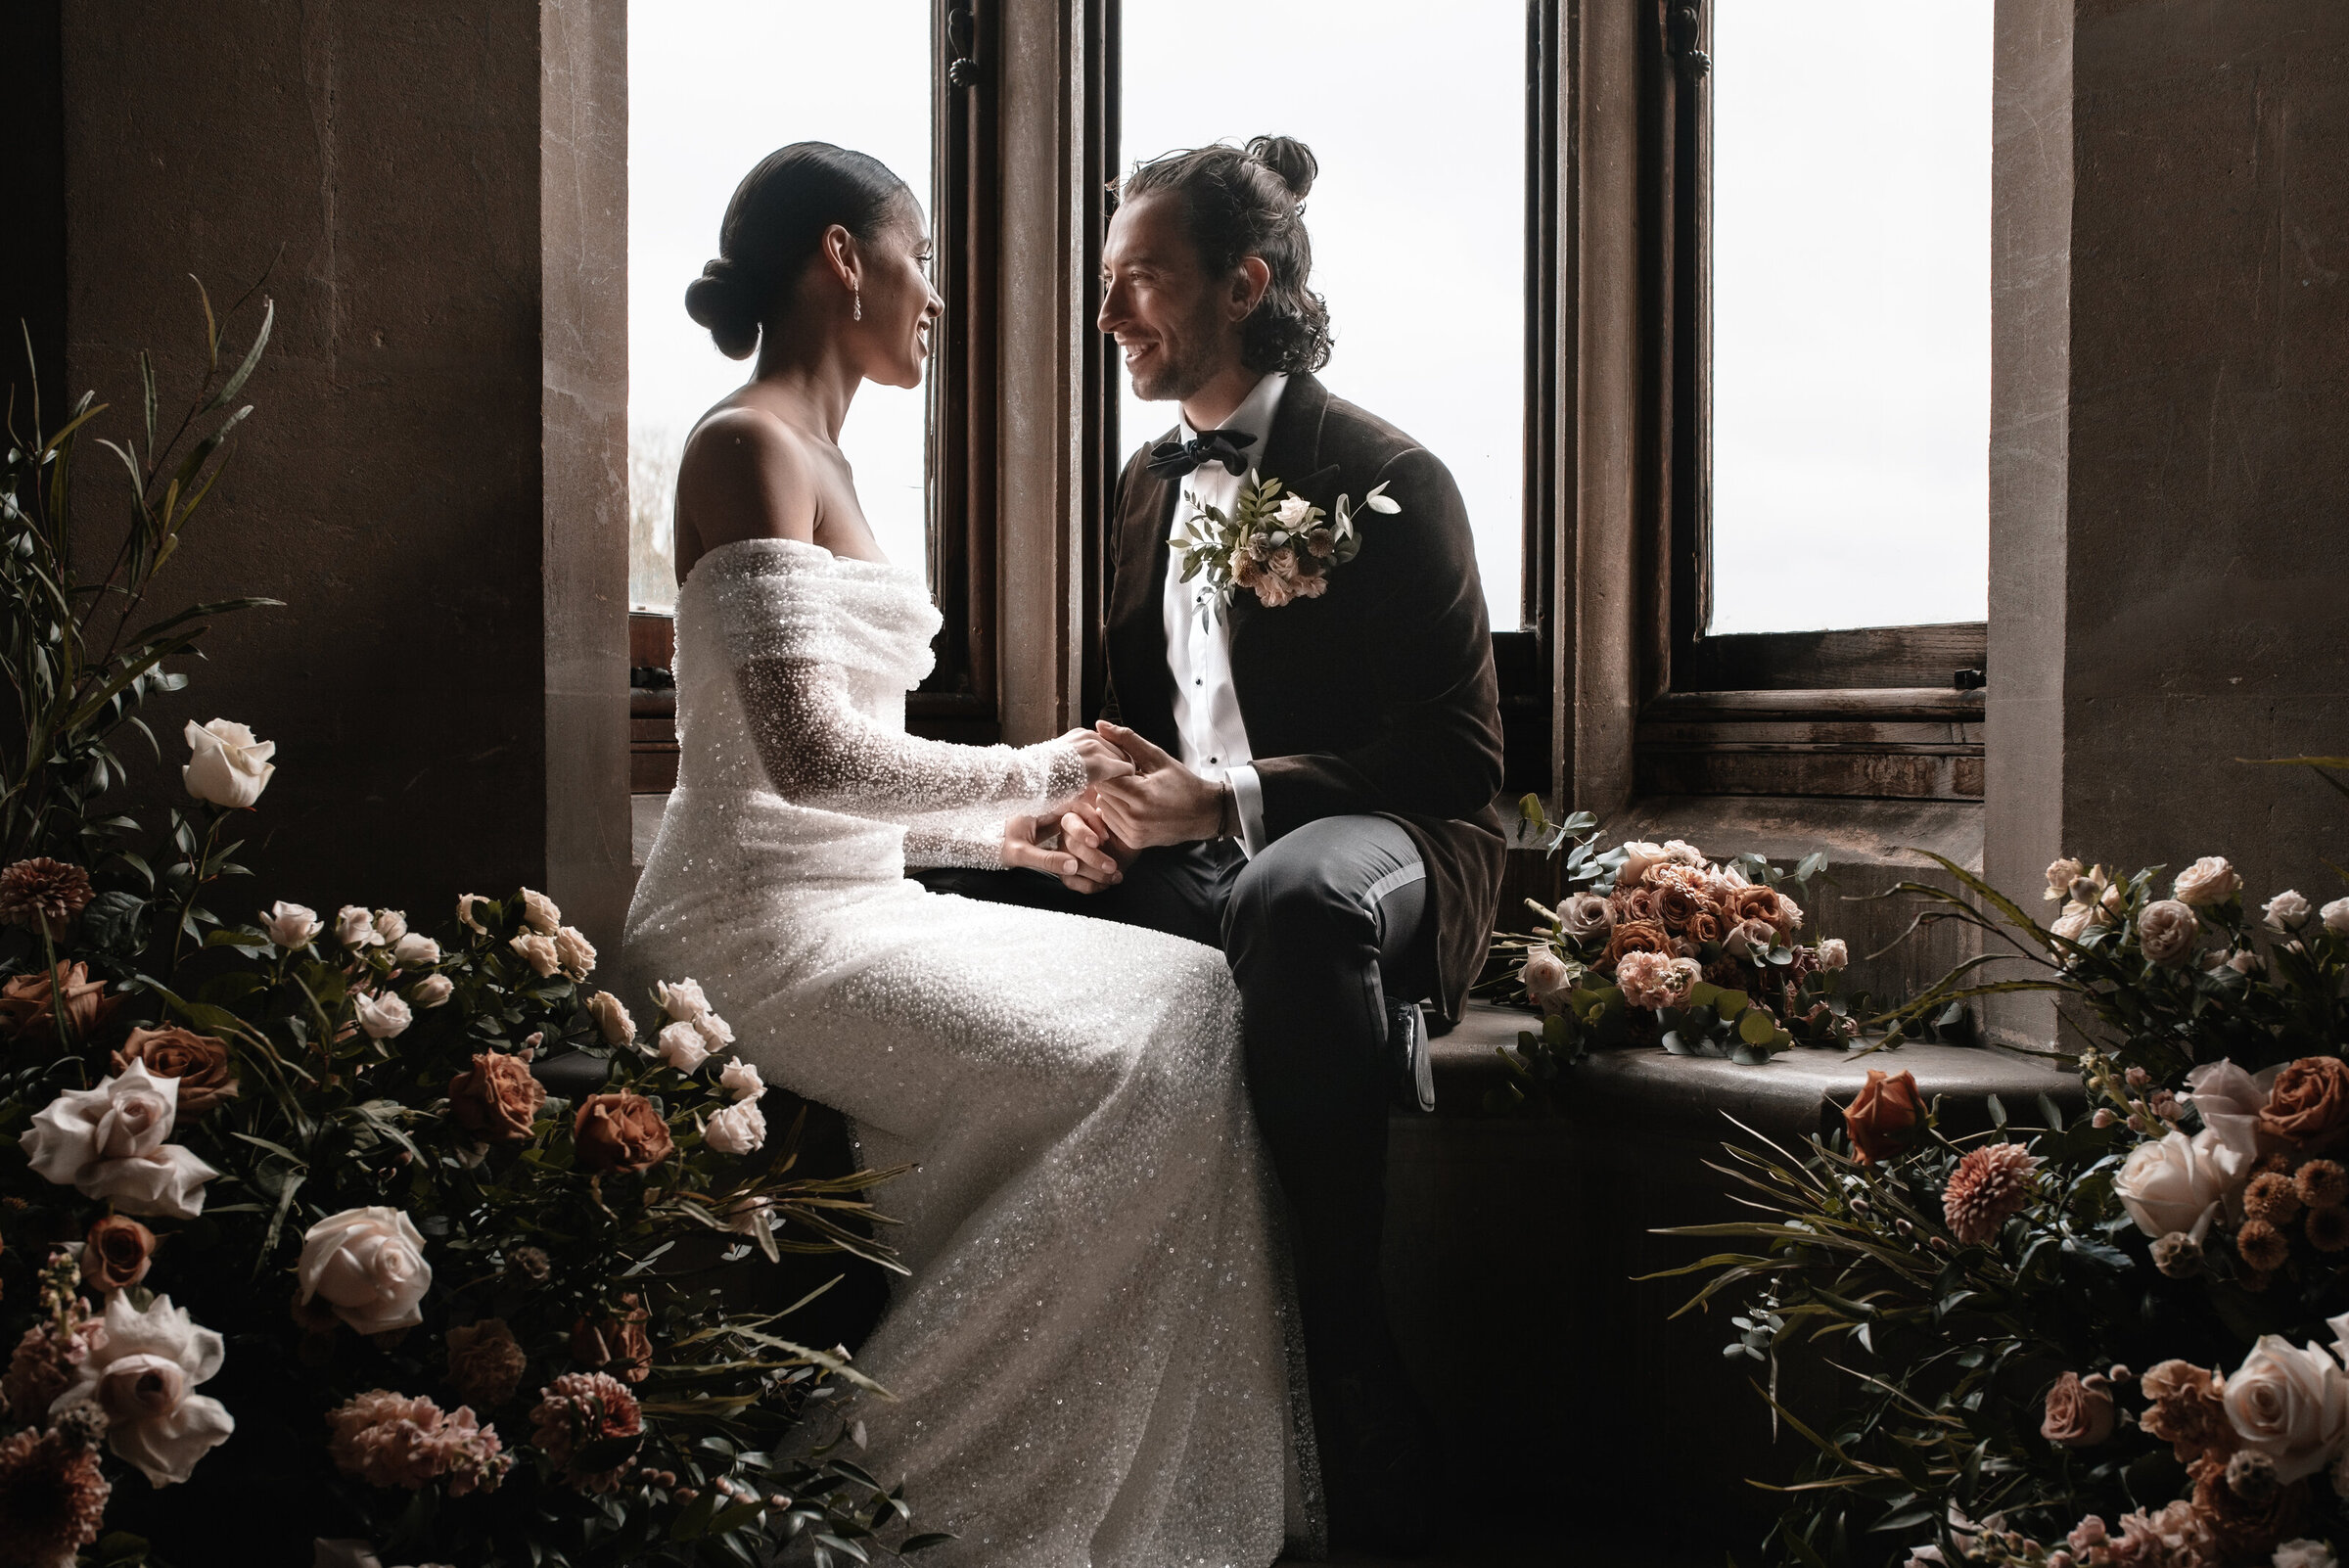 Bride and Groom in wedding attire talking in the windowsill surrounded by floral arrangements